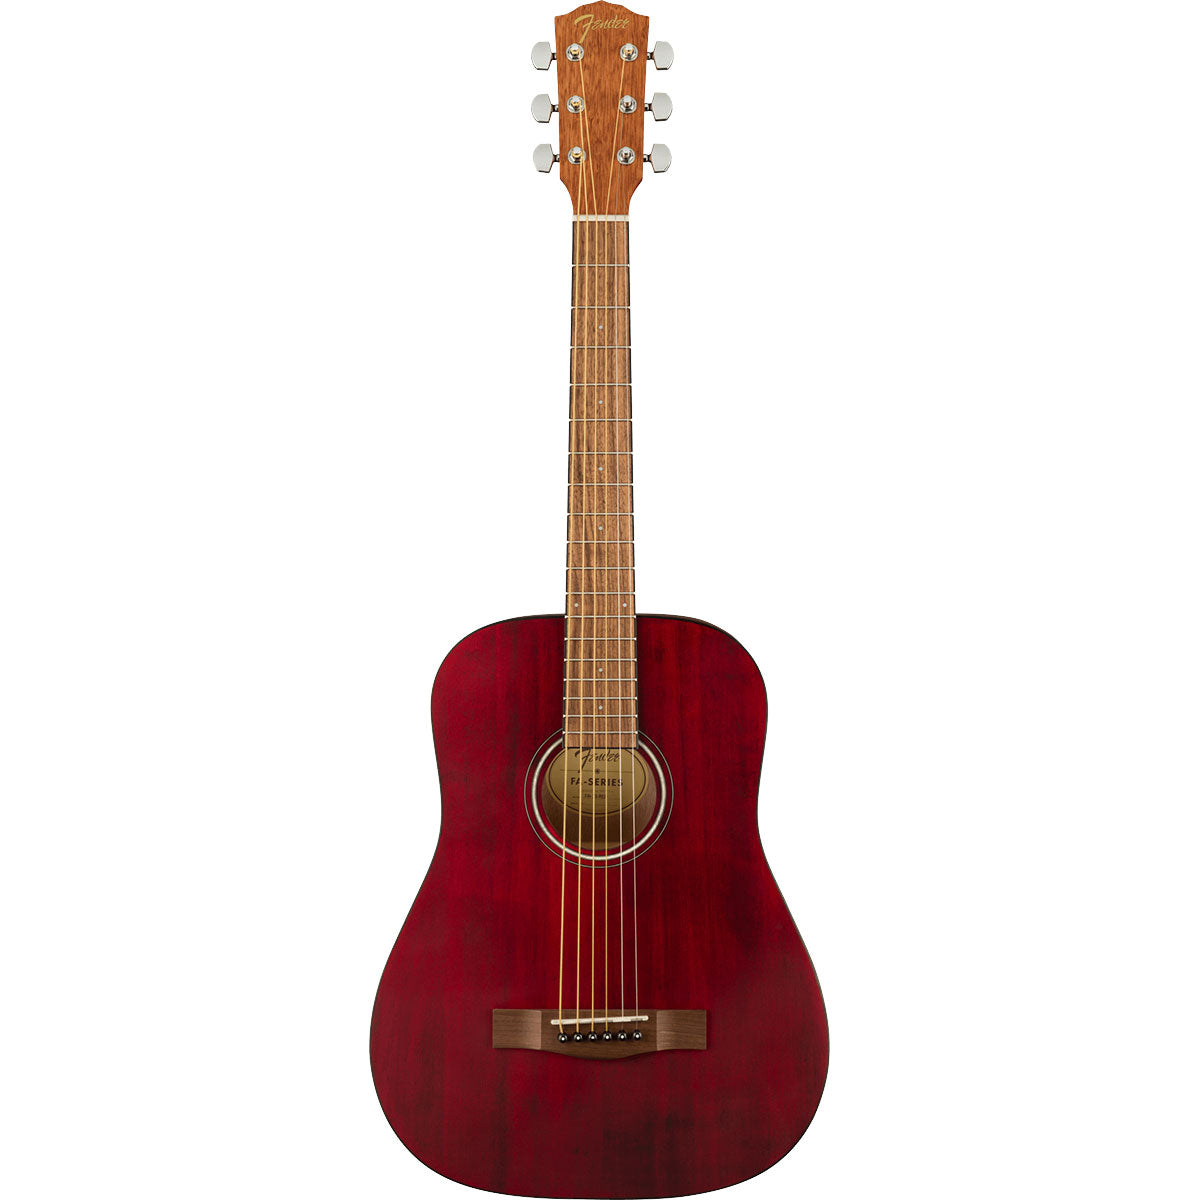 Top view of Fender FA-15 3/4 Steel Acoustic Guitar - Red